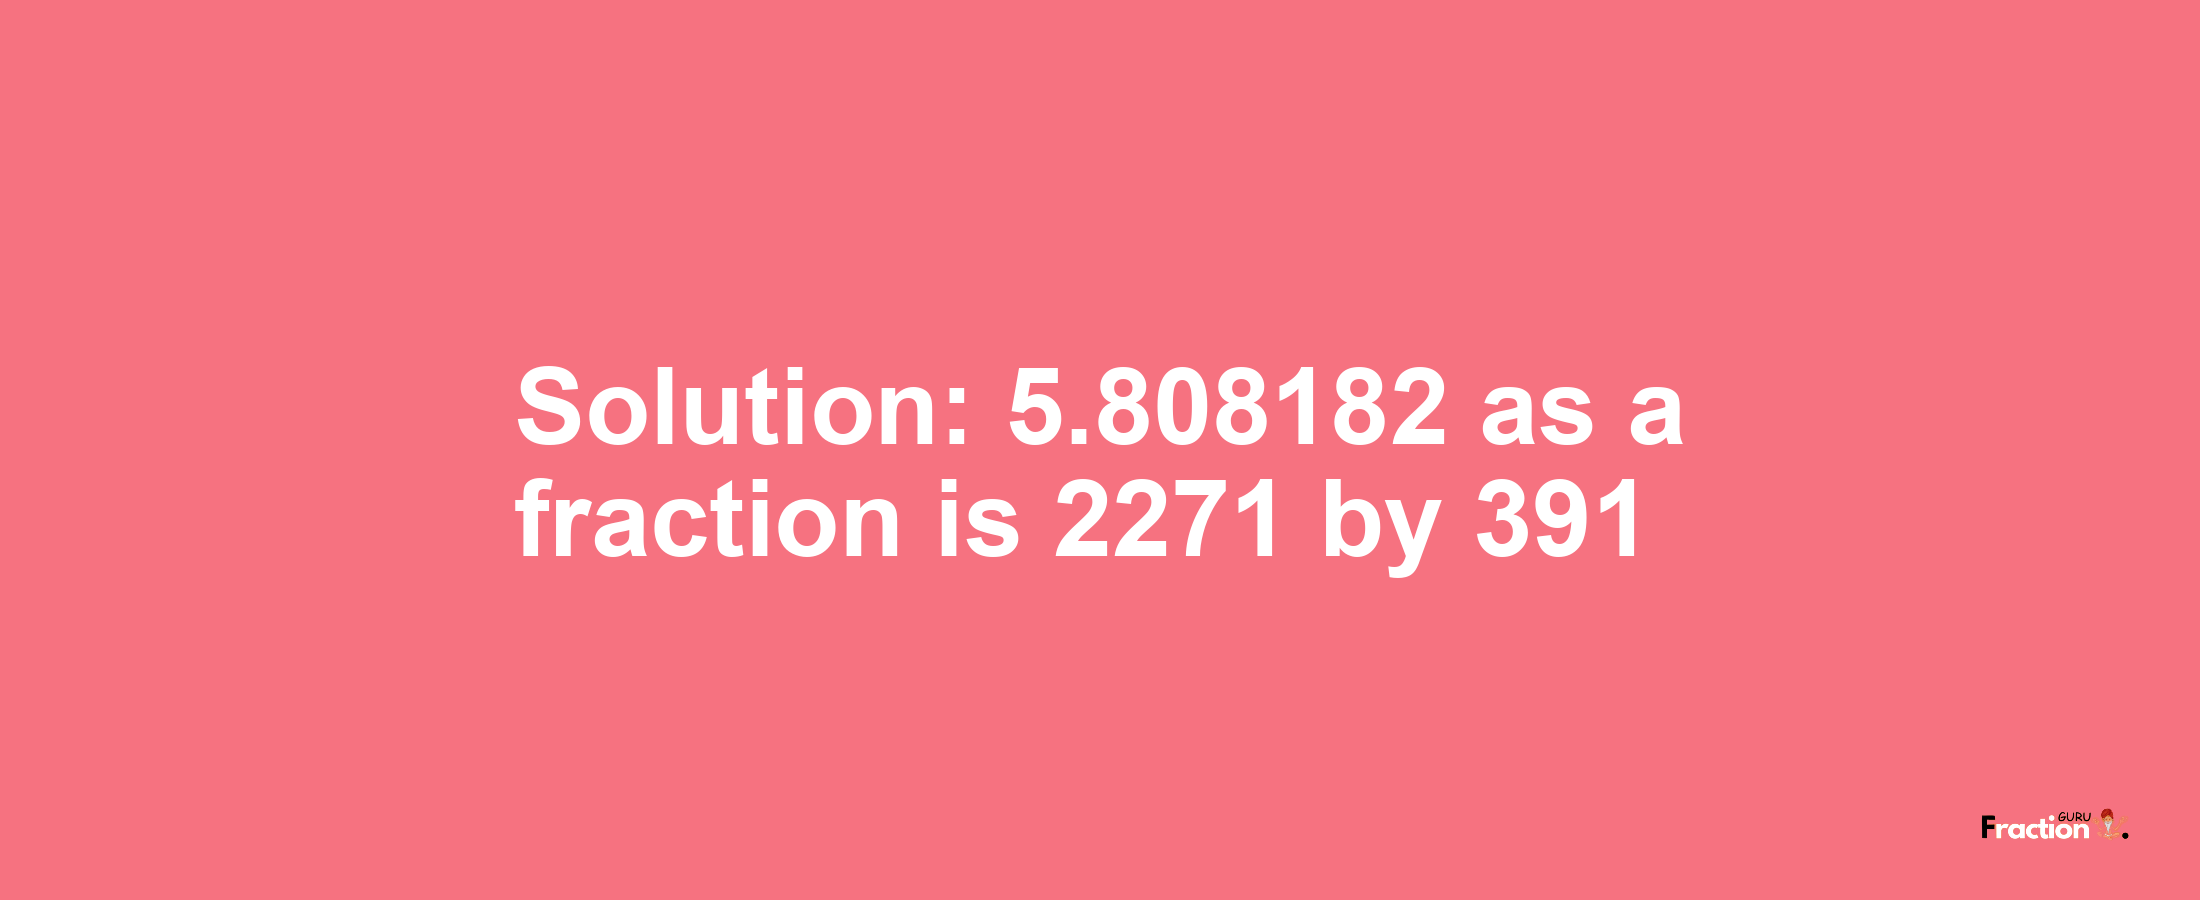 Solution:5.808182 as a fraction is 2271/391